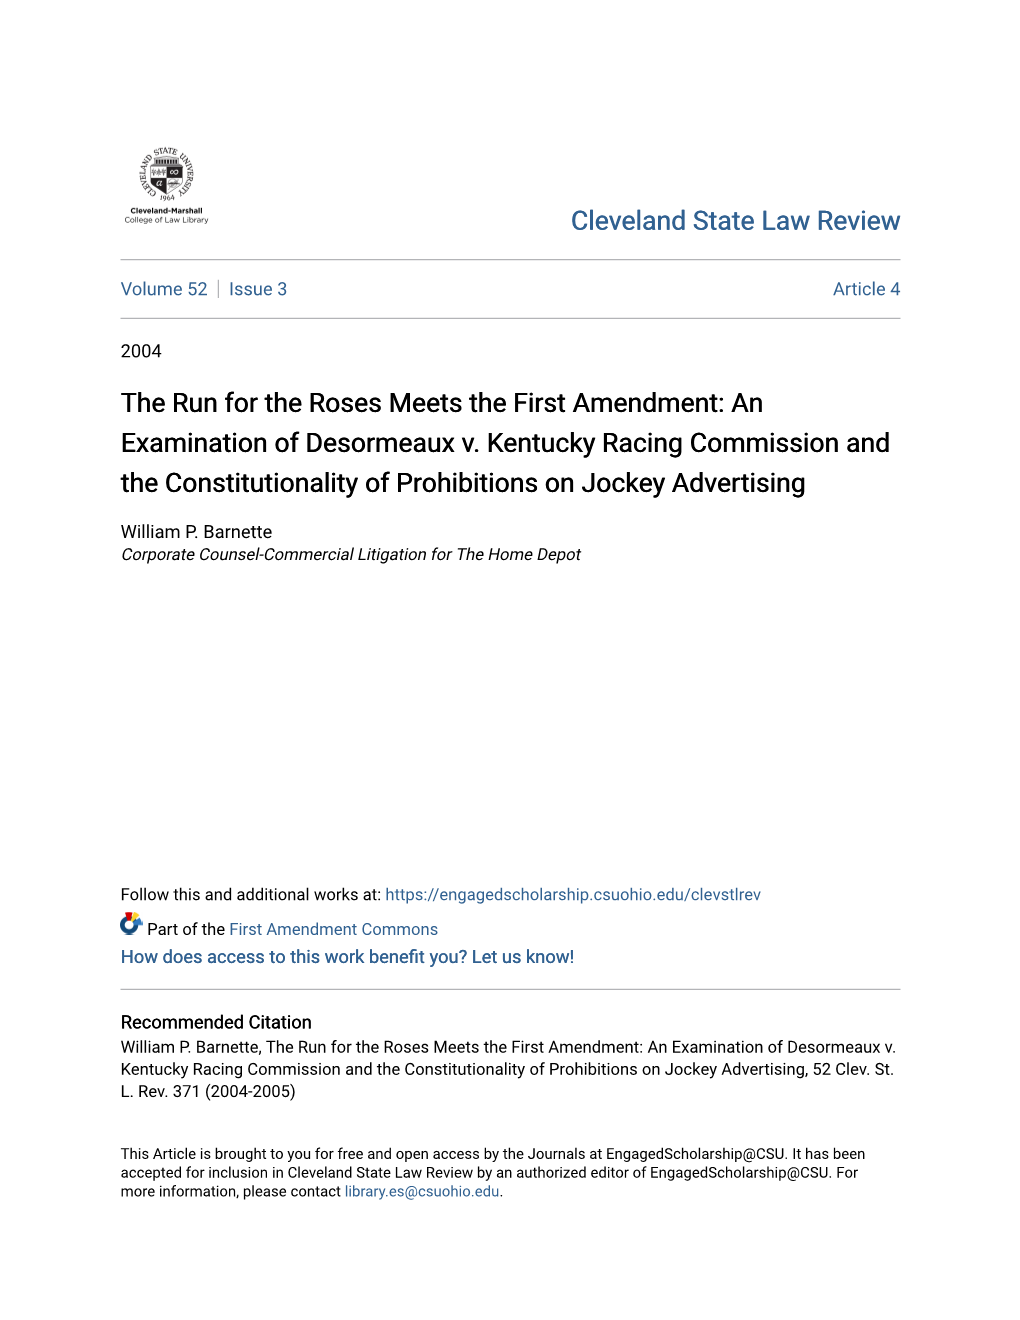 The Run for the Roses Meets the First Amendment: an Examination of Desormeaux V